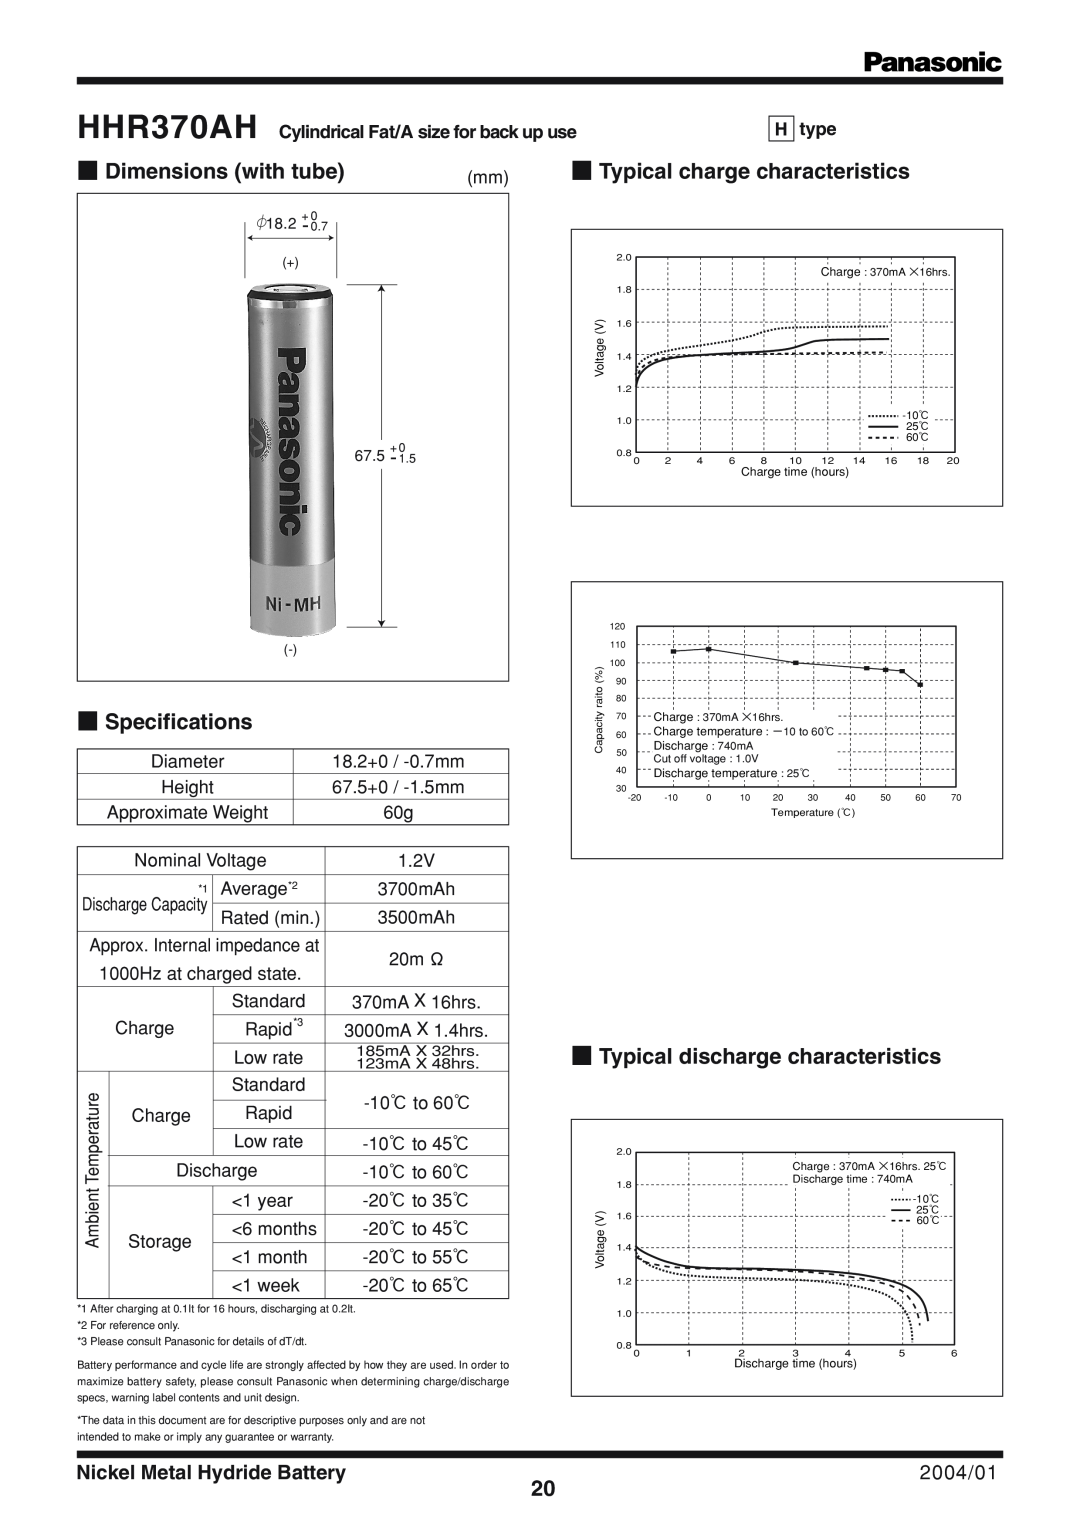 Panasonic HHR370AH specifications Dimensions with tube, Typical charge characteristics, Specifications, 2004/01, H type 